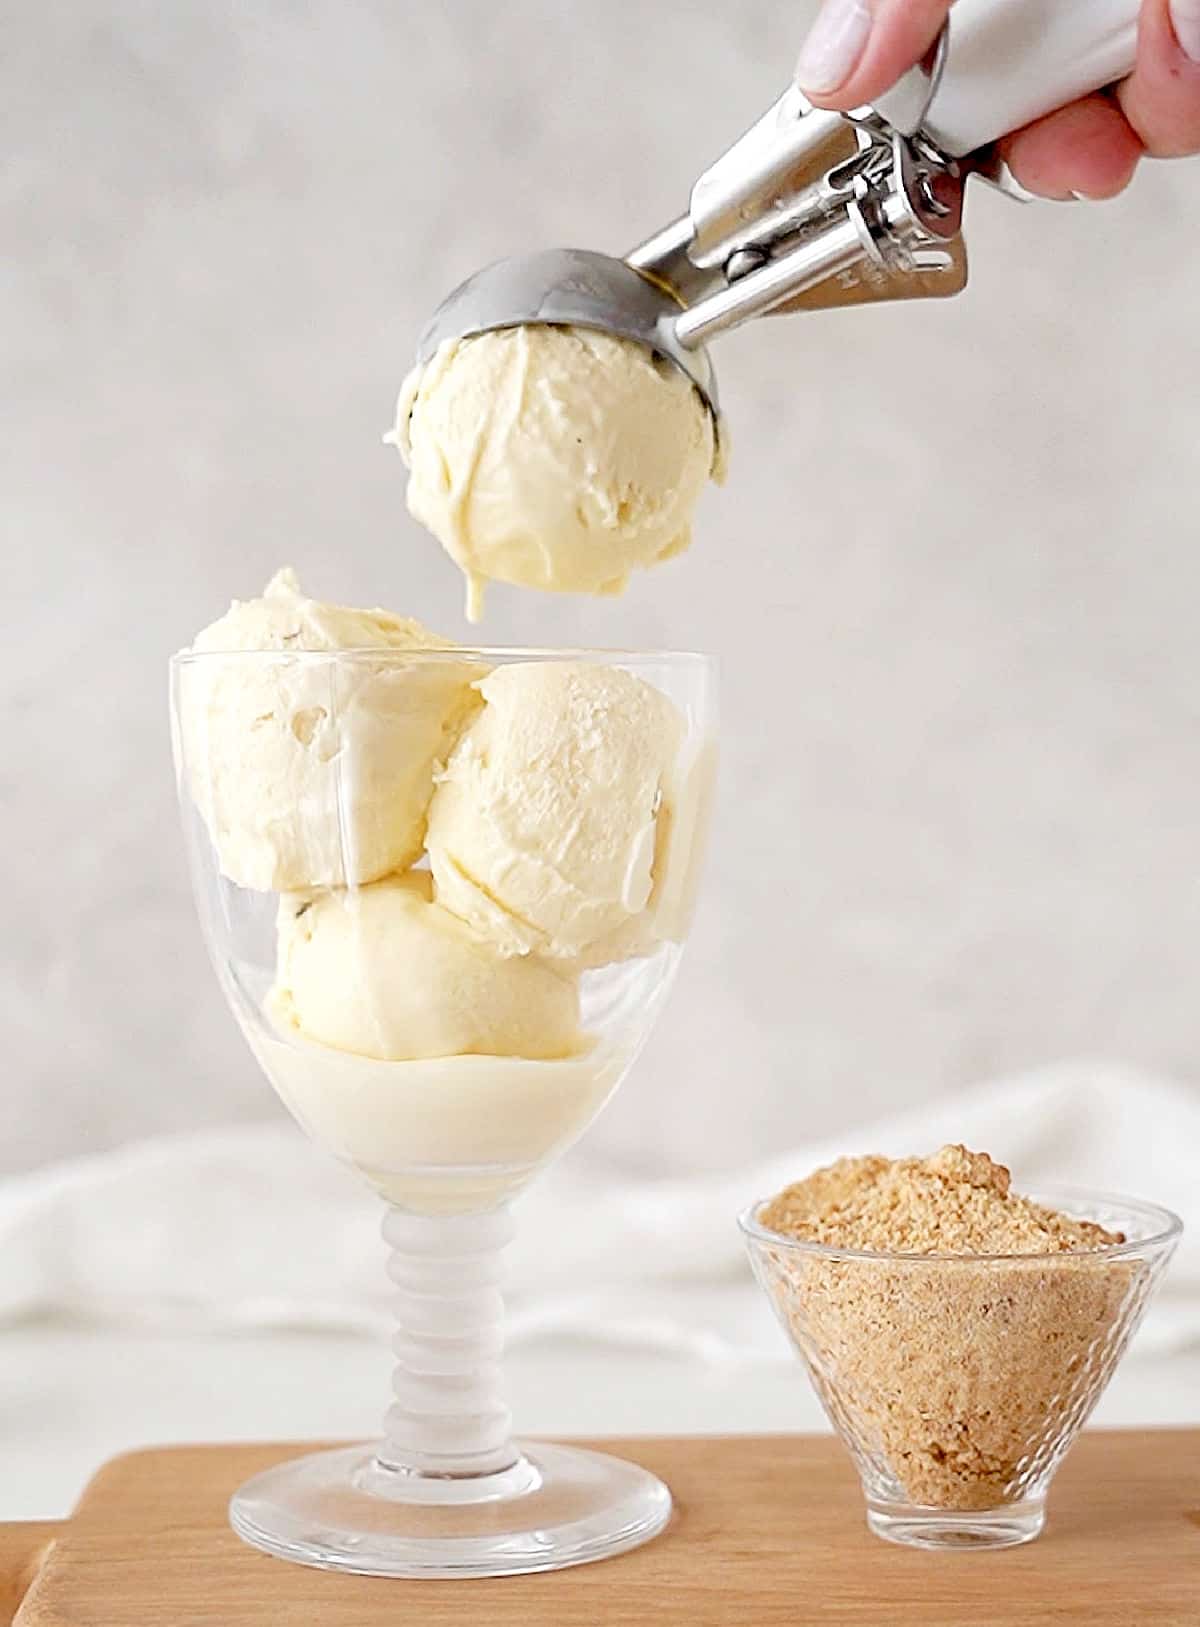 A glass with vanilla ice cream being scooped. Bowl with crumbs, wooden surface, grey background. 